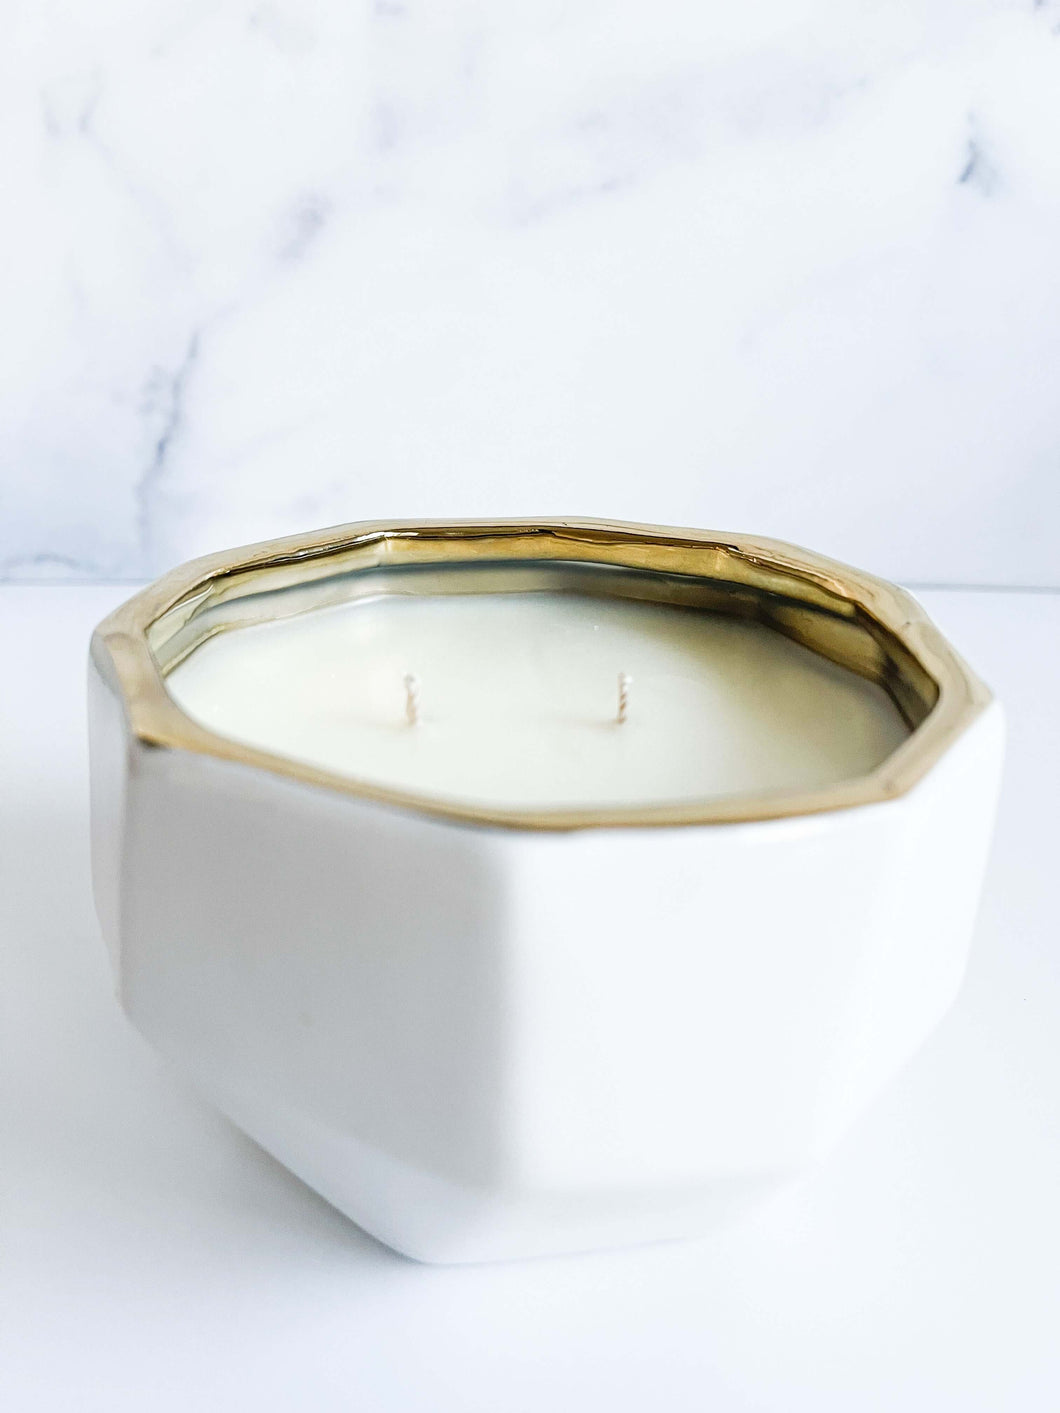 scented candle,how to make a scented candle,coffee scented candle,christmas scented candle,pine scented candle,rose scented candle,vanilla scented candle,leather scented candle, lemon scented candle,tobacco scented candle,scented candle wax,lavender scent